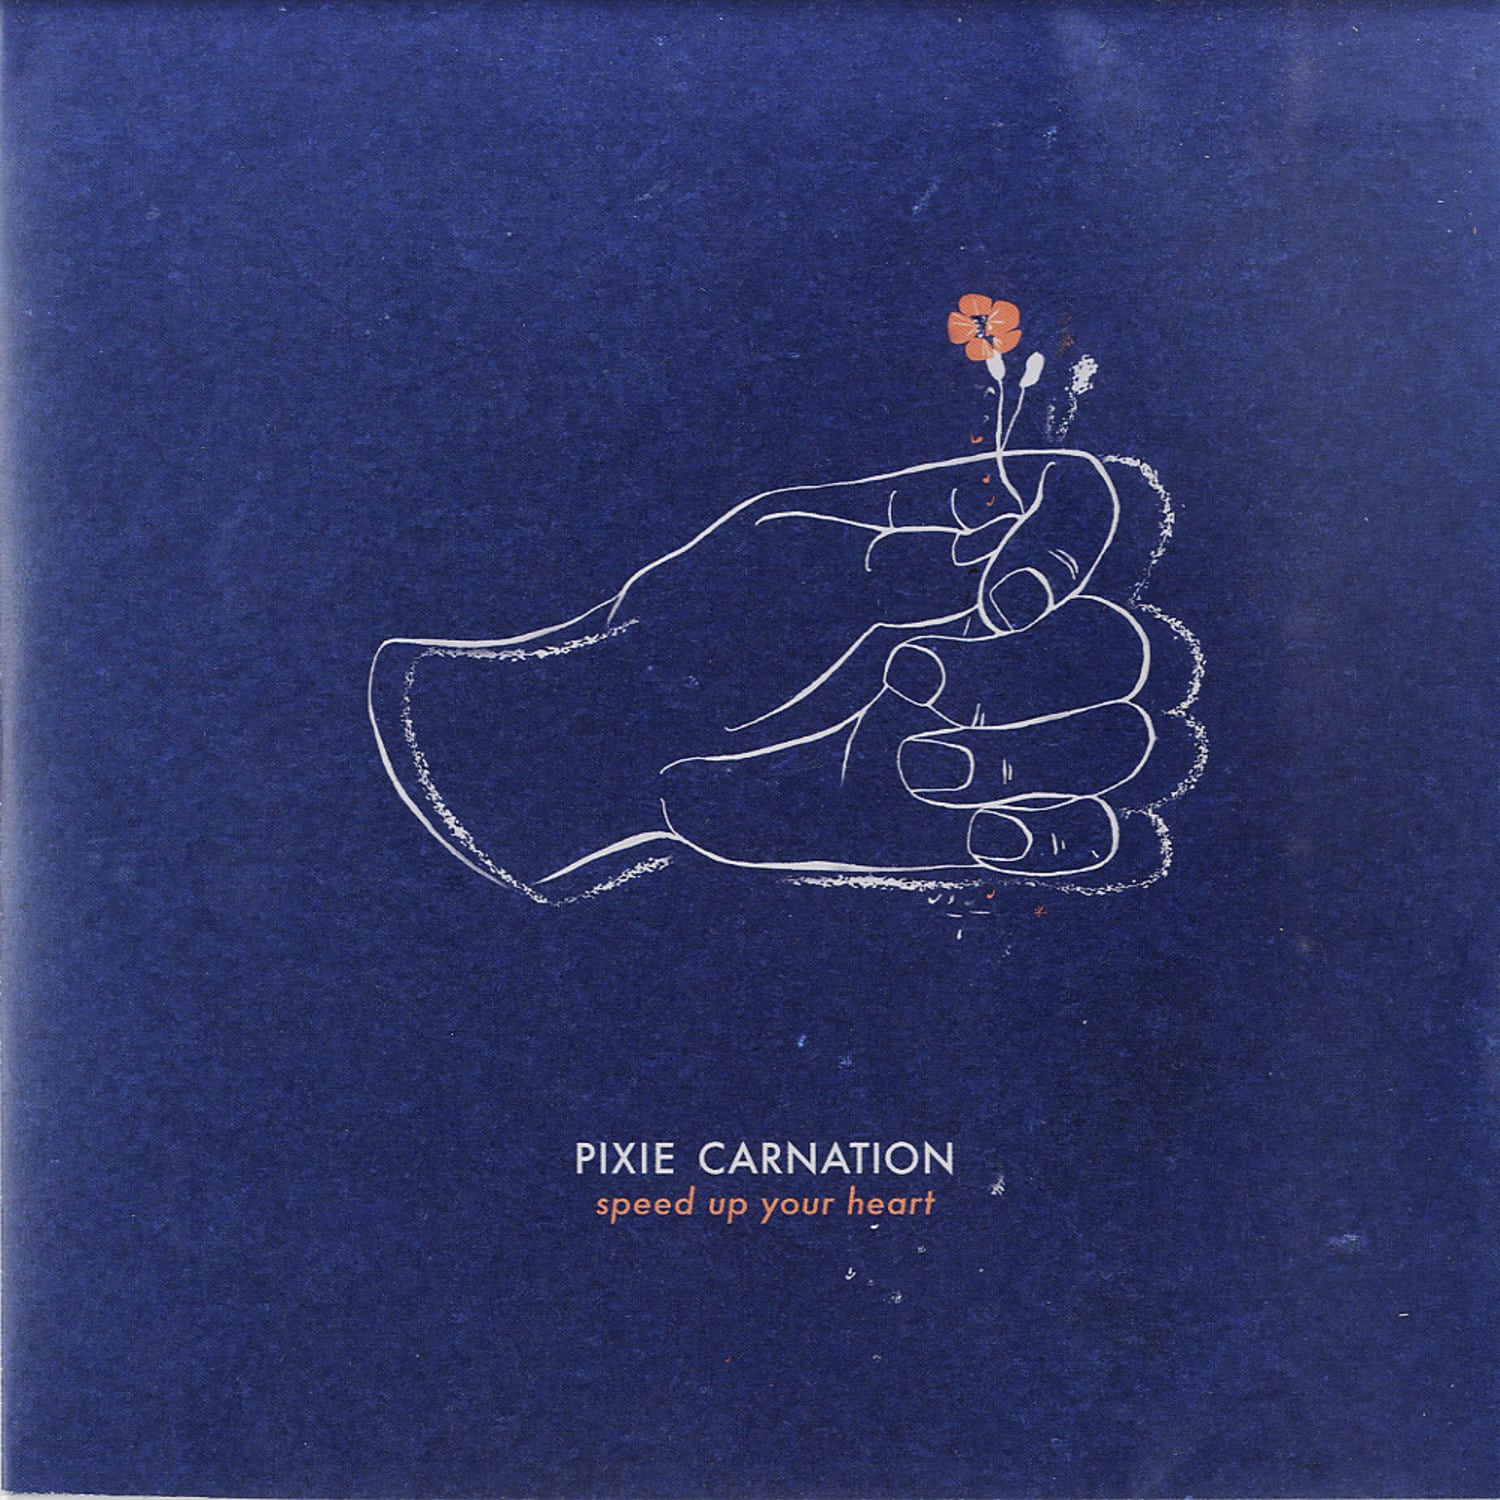 Pixie Carnation - SPEED UP YOUR HEART 